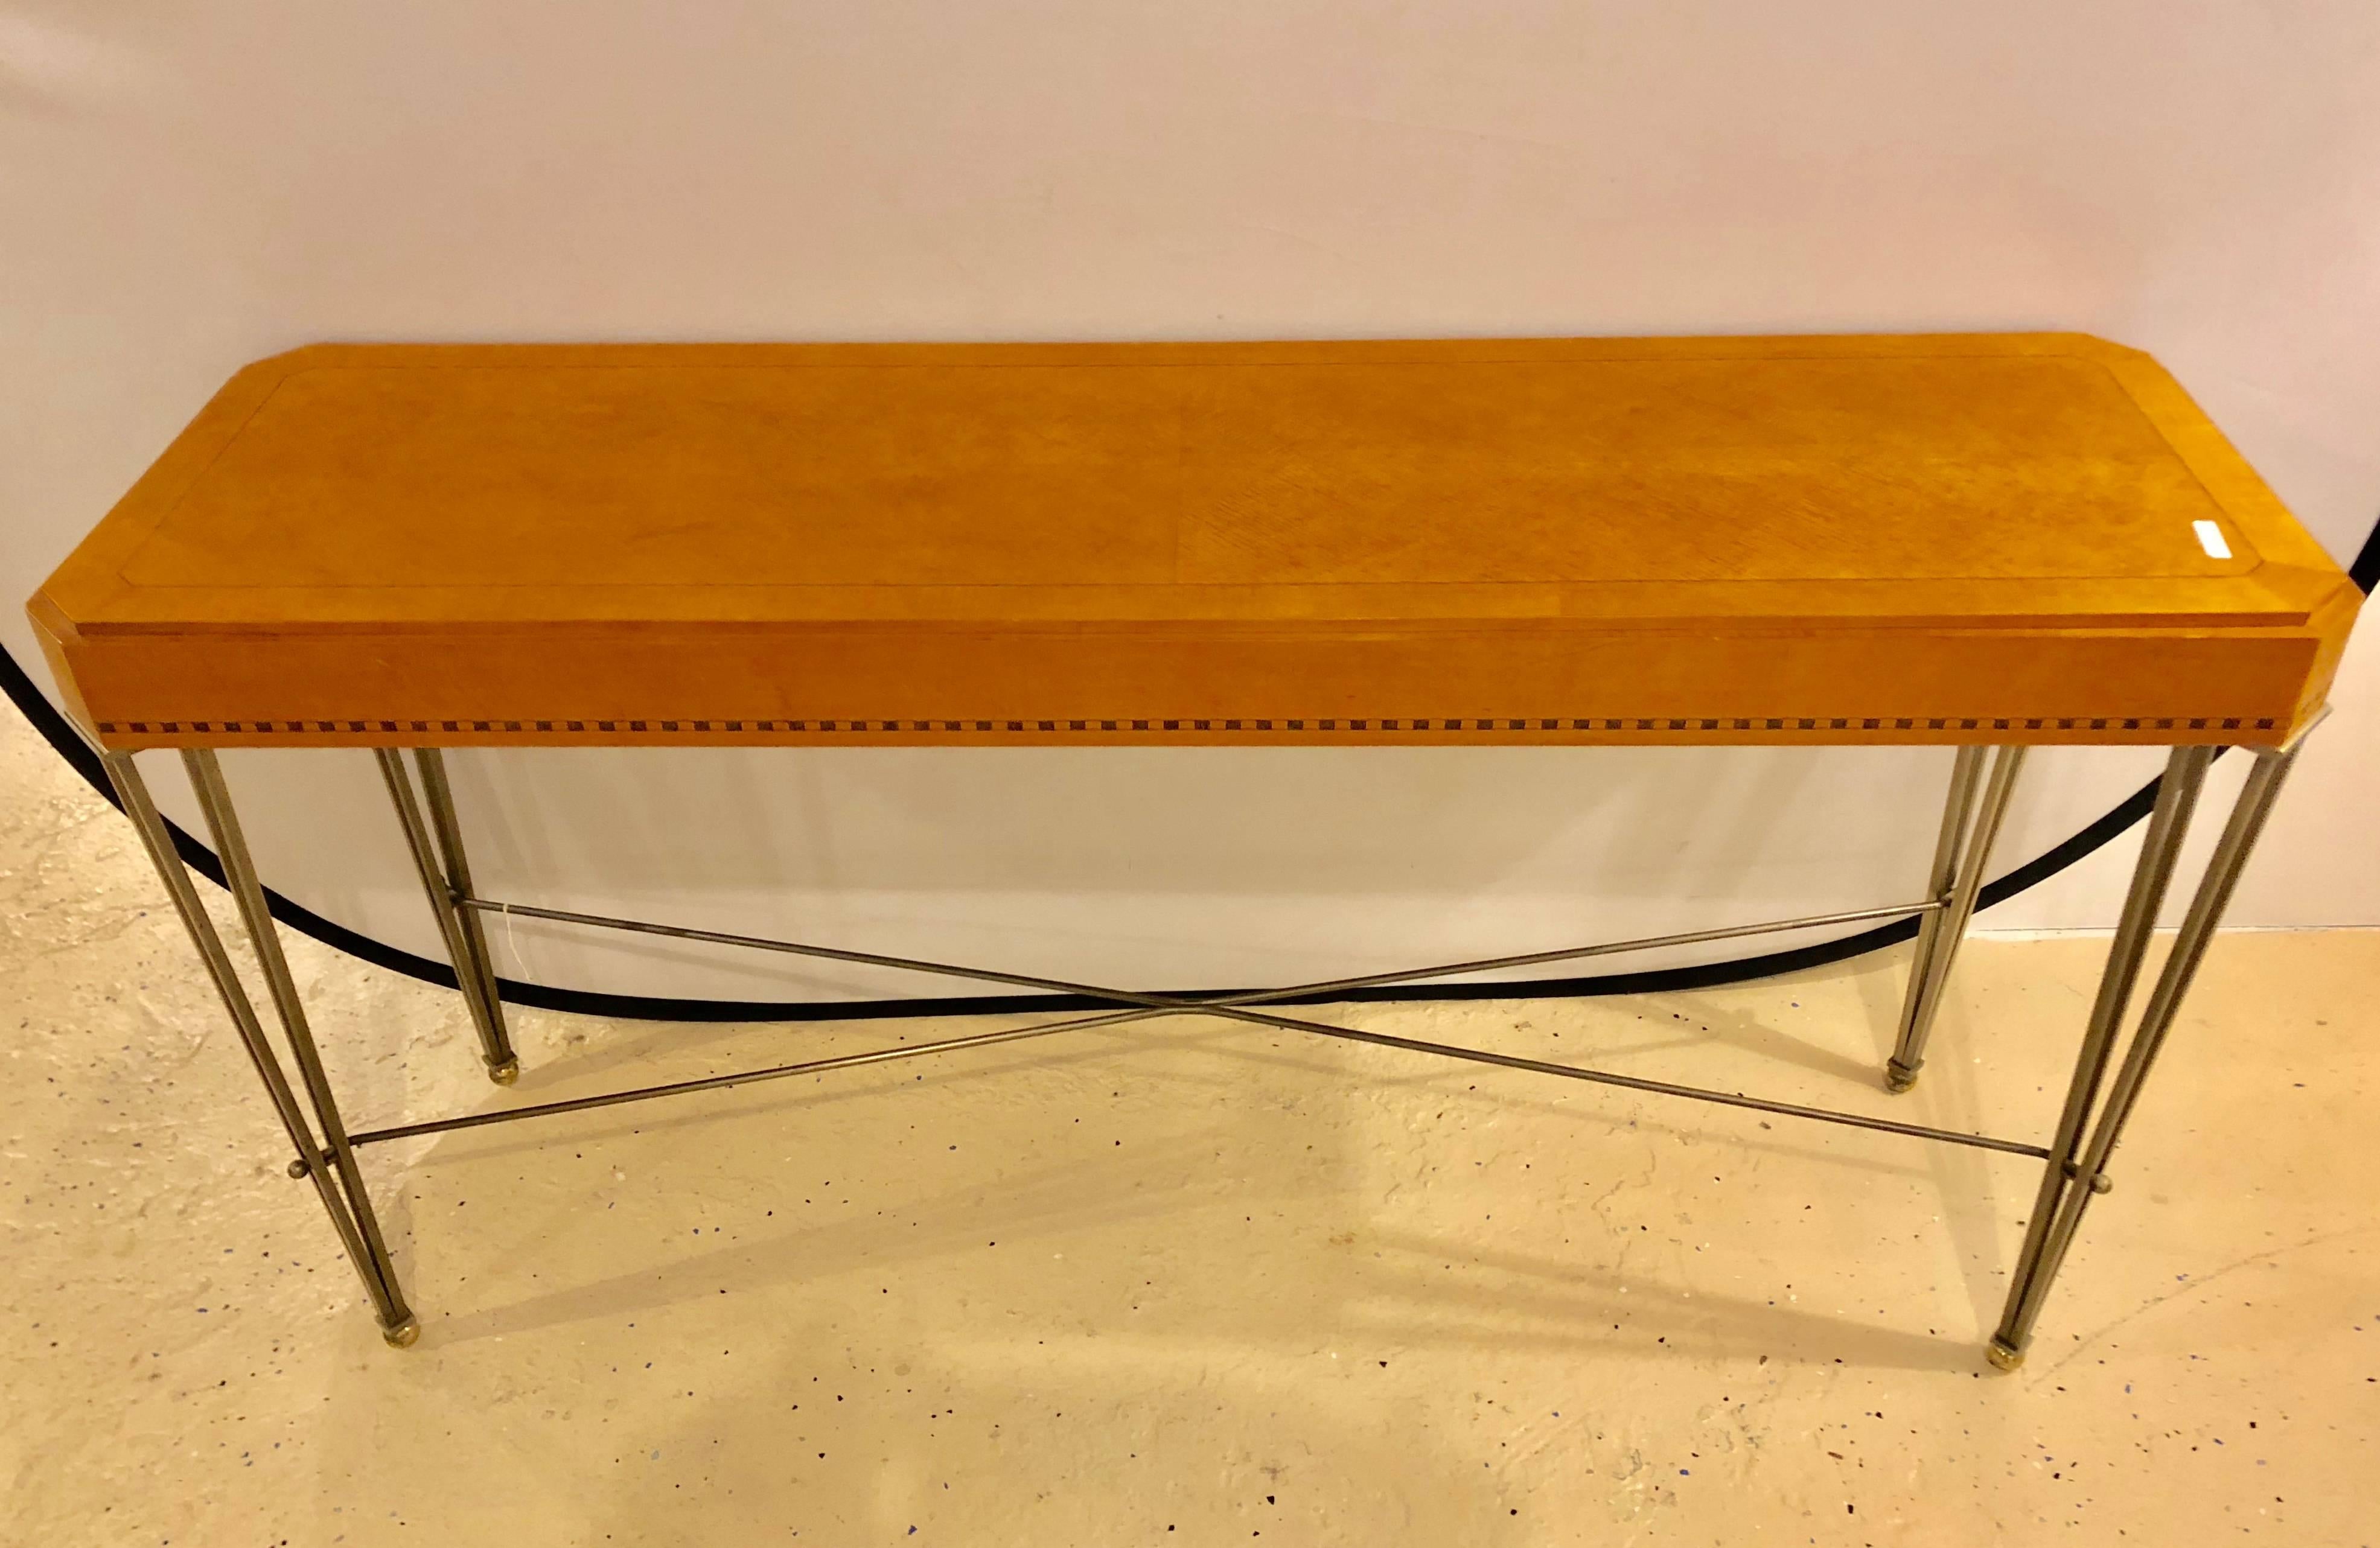 A fine Hollywood Regency style console or sofa table, American, late 20th century. A maple veneer console table, having chamfered corners and checkerboard detailing, on patinated metal legs with ball feet.